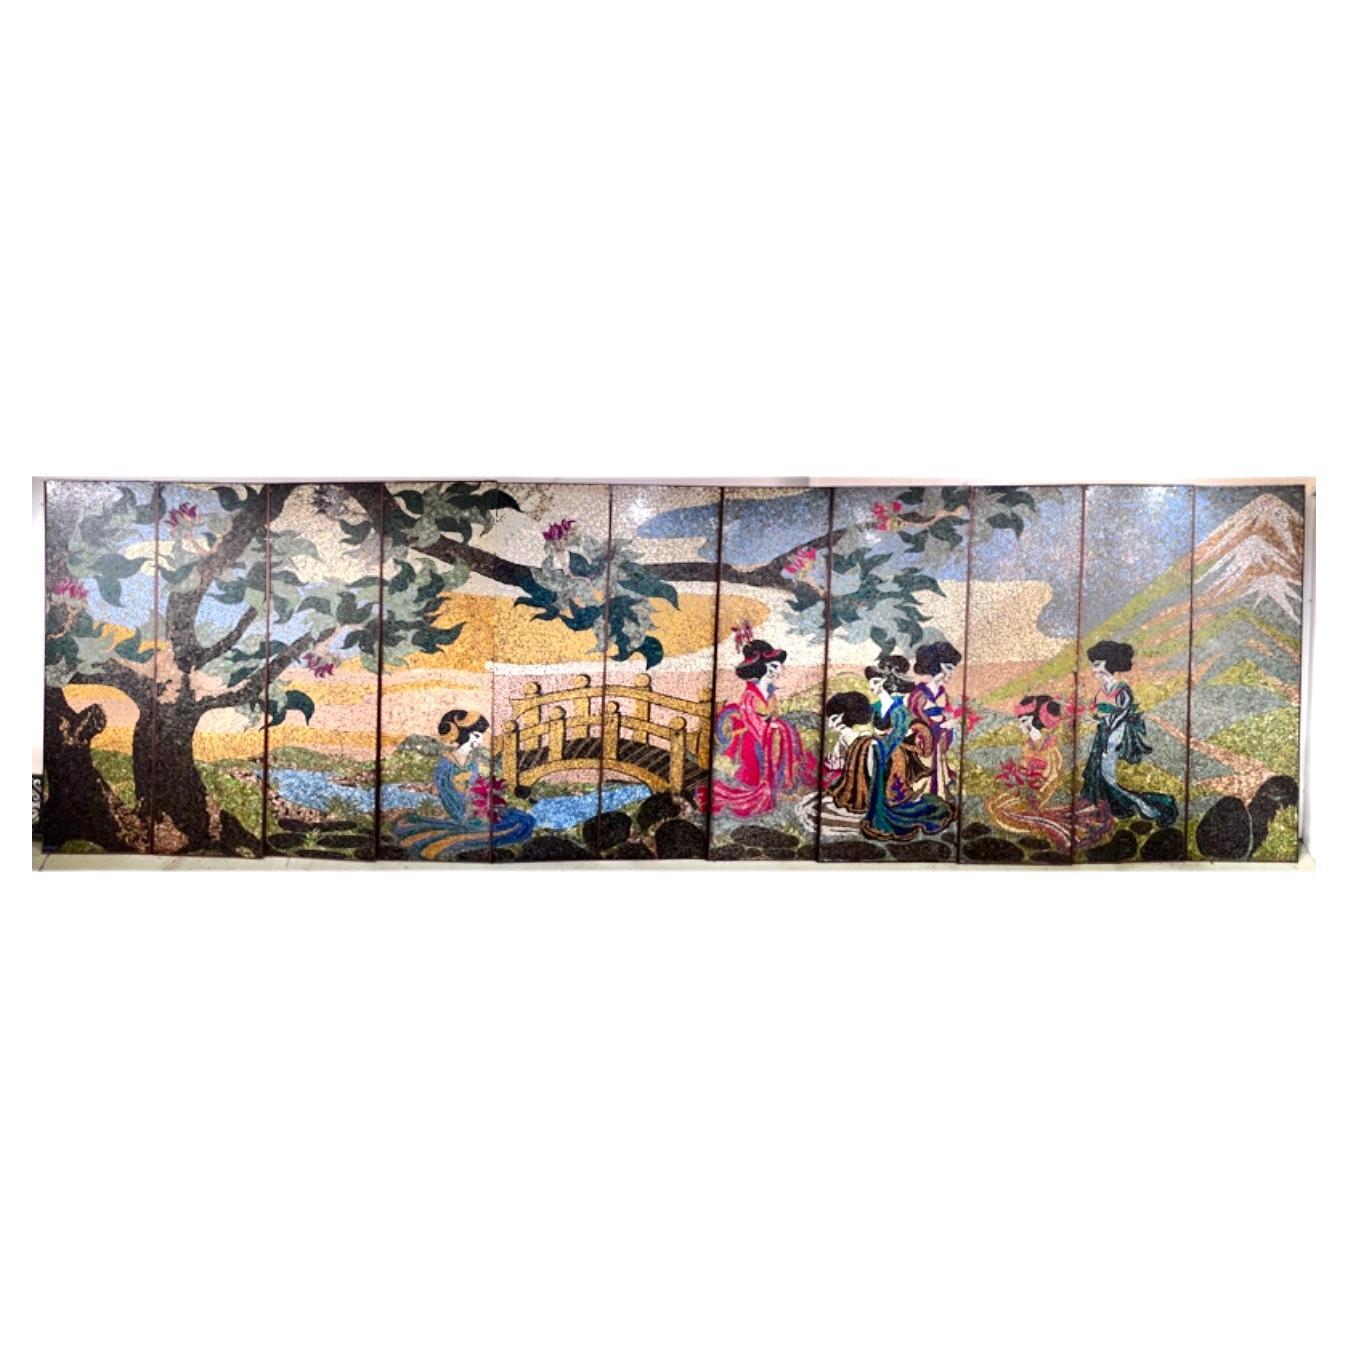 Hand Crafted Mosaic Glass Japanese Screen with a Tale of a Geisha Wedding